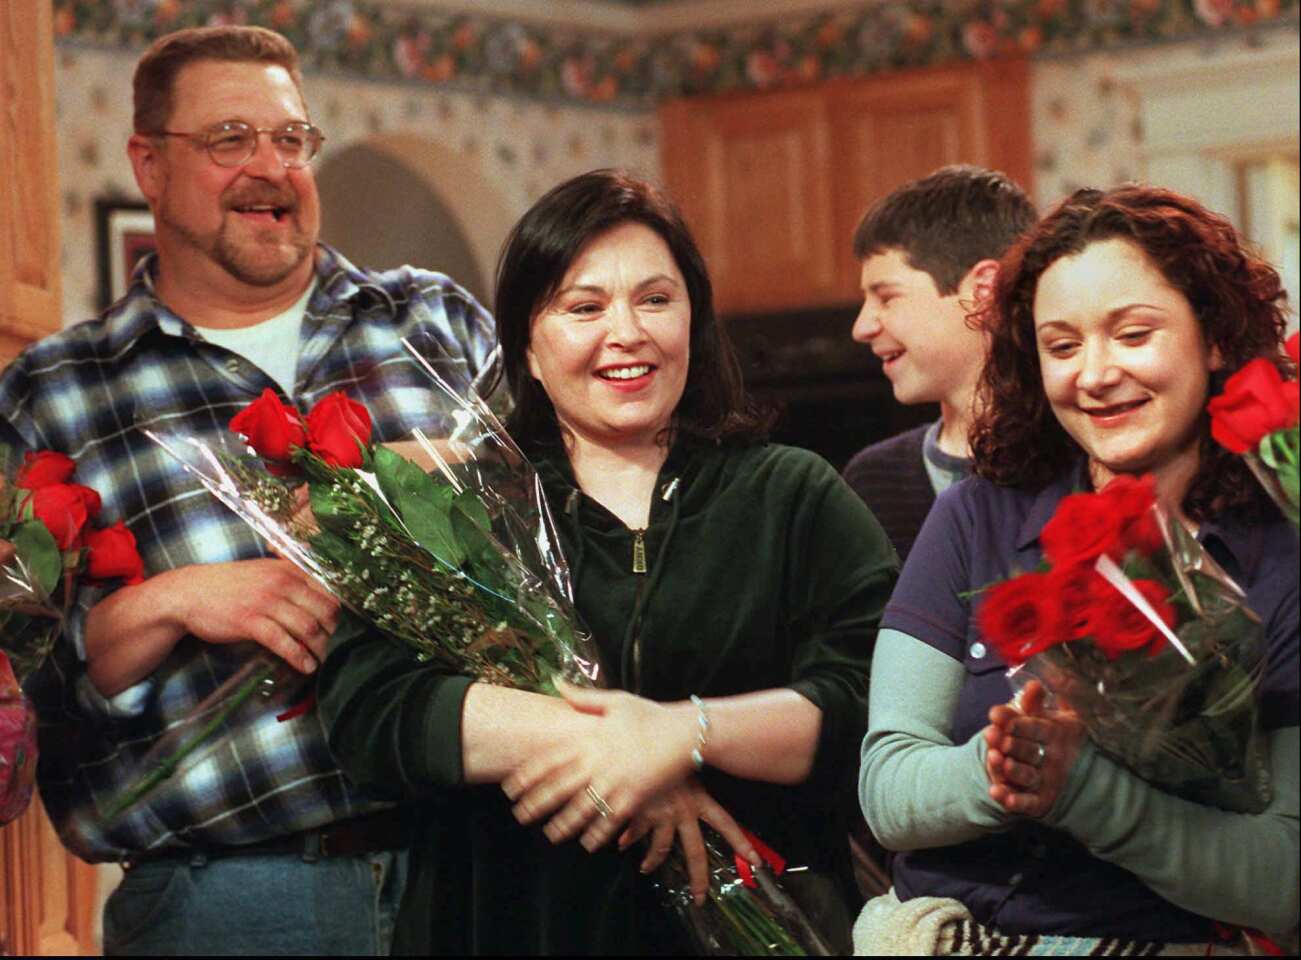 Who are they: The Connors are a working-class family who live in Lanford, Ill. Roseanne (Roseanne Barr), the quick-witted matriarch of the family, and Dan (John Goodman) try to keep a little order in the family and not be too hypocritical, since they were rebellious in their youth as well. Darlene (Sara Gilbert) is the independent daughter following her own path; Becky (Alicia Goranson) the "I wanna be popular" older sister; and D.J. (Michael Fishman) was the little accident, growing up in something of a wacky household. Darlene's boyfriend David (Johnny Galecki) later moved in. What the kids like: The snark. Darlene is the talk-back master and bane of her little brother DJ, a relationship many older sisters/younger brothers have. And Darlene is the antithesis of older sister Becky, also a staple of many older/younger sister relationships. Besides DJ, what unites them is the idea of getting something over on mom. Later, they may have liked the fact that Darlene's boyfriend David was allowed to move in. What the parents like: That the kids could not get anything over on Roseanne. As the series progressed, she even allowed Darlene's boyfriend to move in, helping him out because of a rough home life, but also to keep an eye on them. She rules the family with an iron and ironic fist, with dad Dan putting his foot down when needed, but mainly following her lead (after an argument). They struggle financially sometimes, but generally keep it all together using humor.